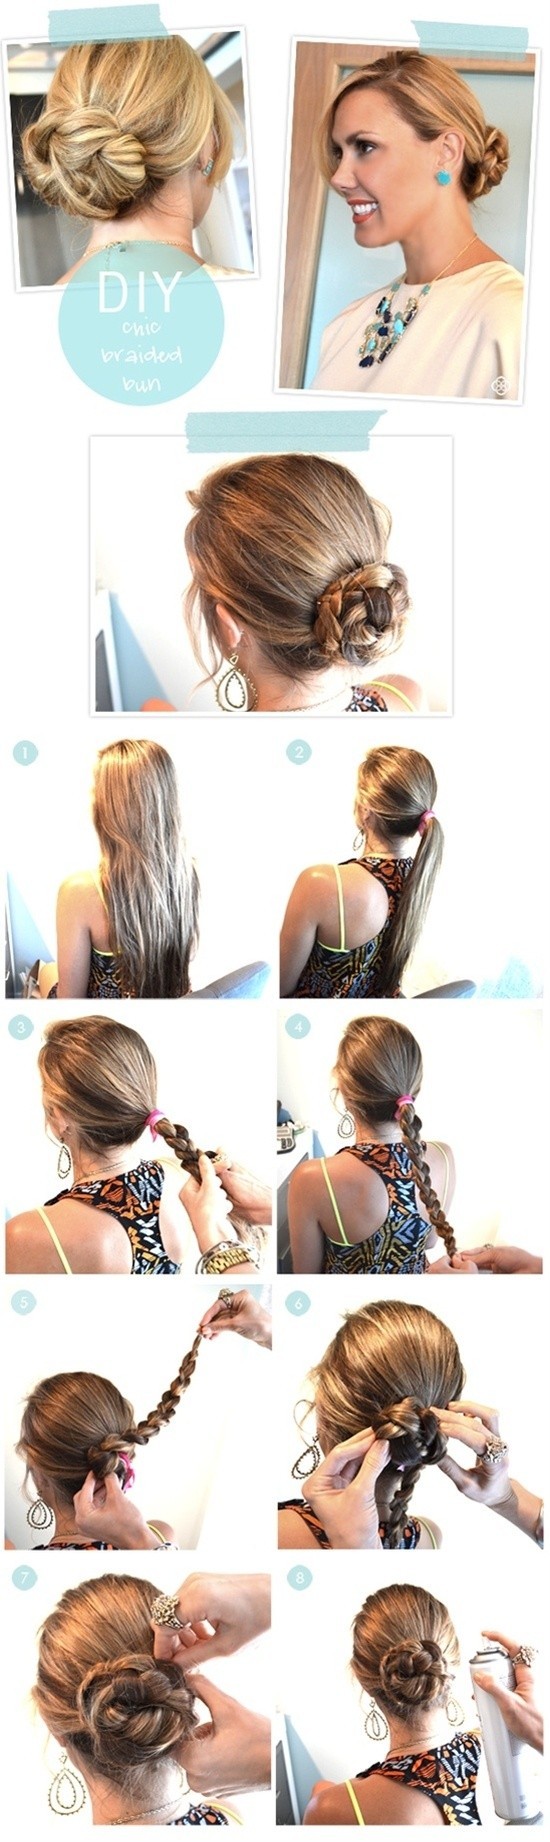 Hairstyles For Long Hair Steps PictureFuneral Program Designs